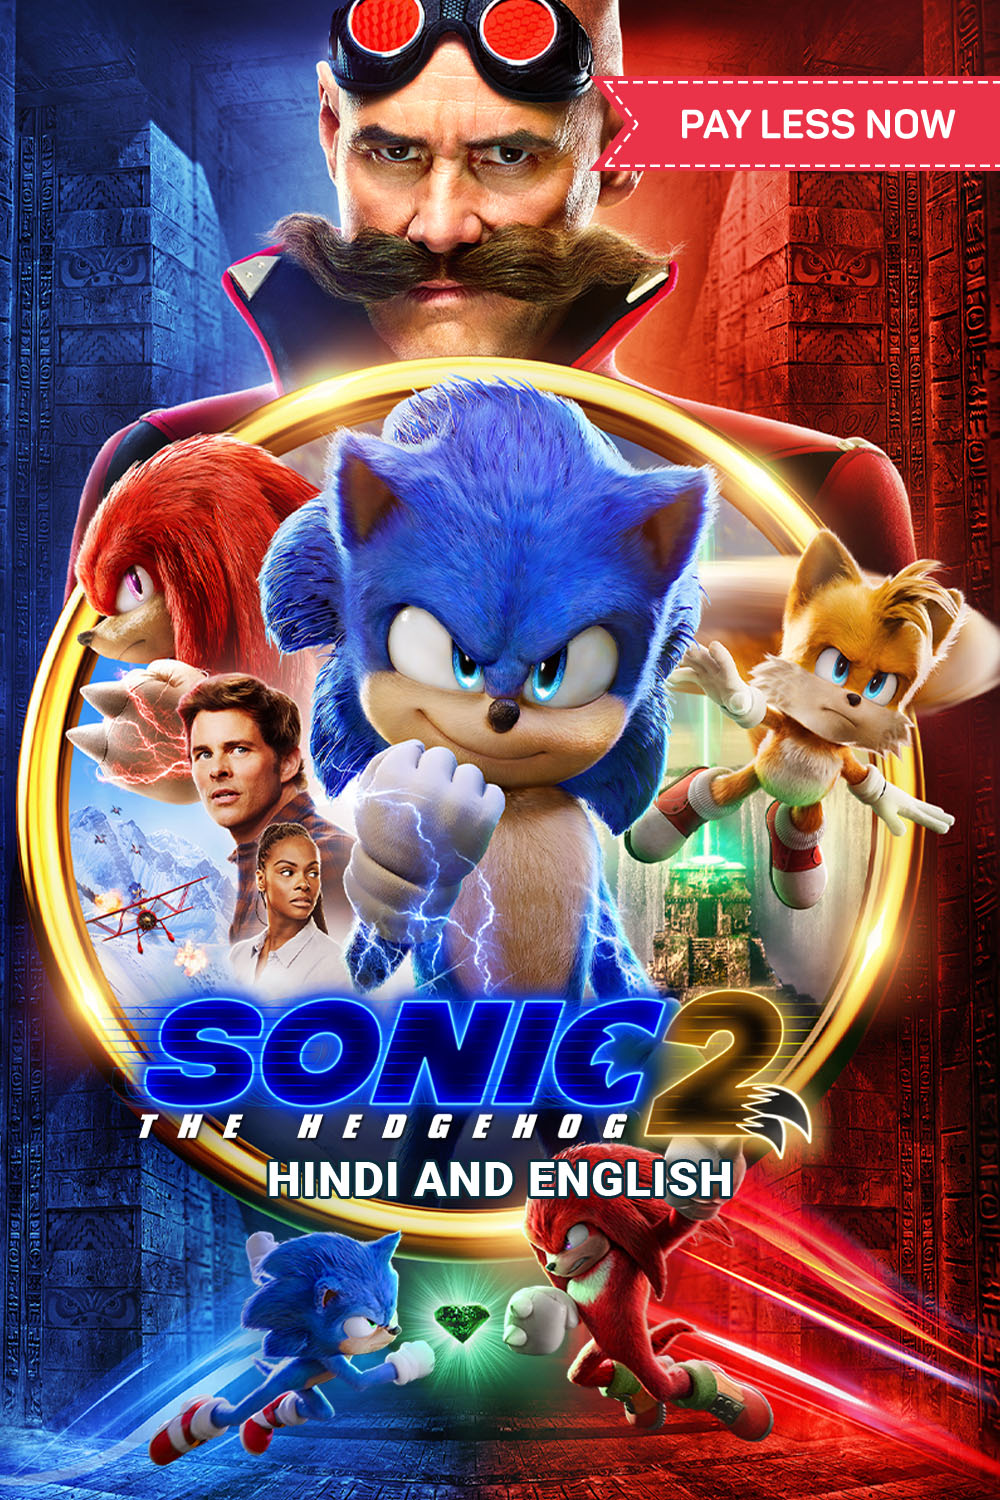 Watch Sonic: The Hedgehog 2 Movie Online | Buy Rent Sonic: The Hedgehog 2  On BMS Stream